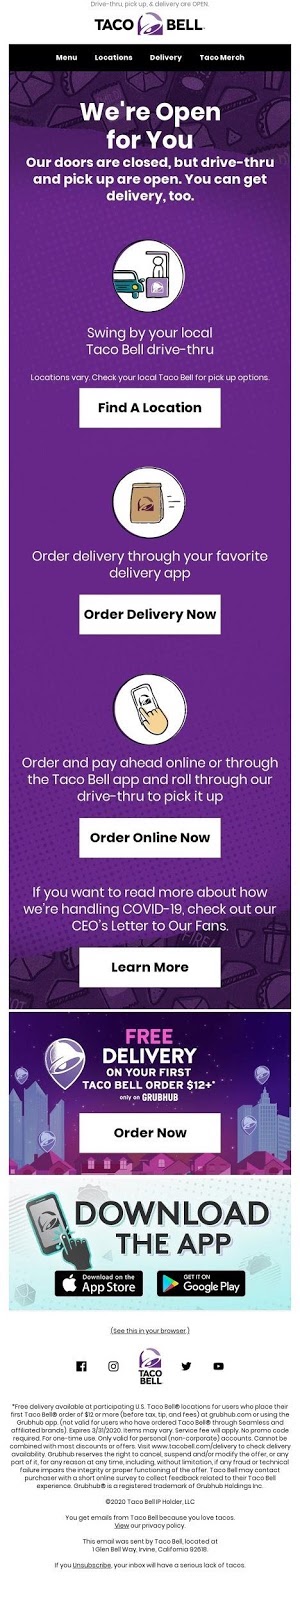 Taco Bell’s on-point brand consistency email features their familiar logo, colors, and font.